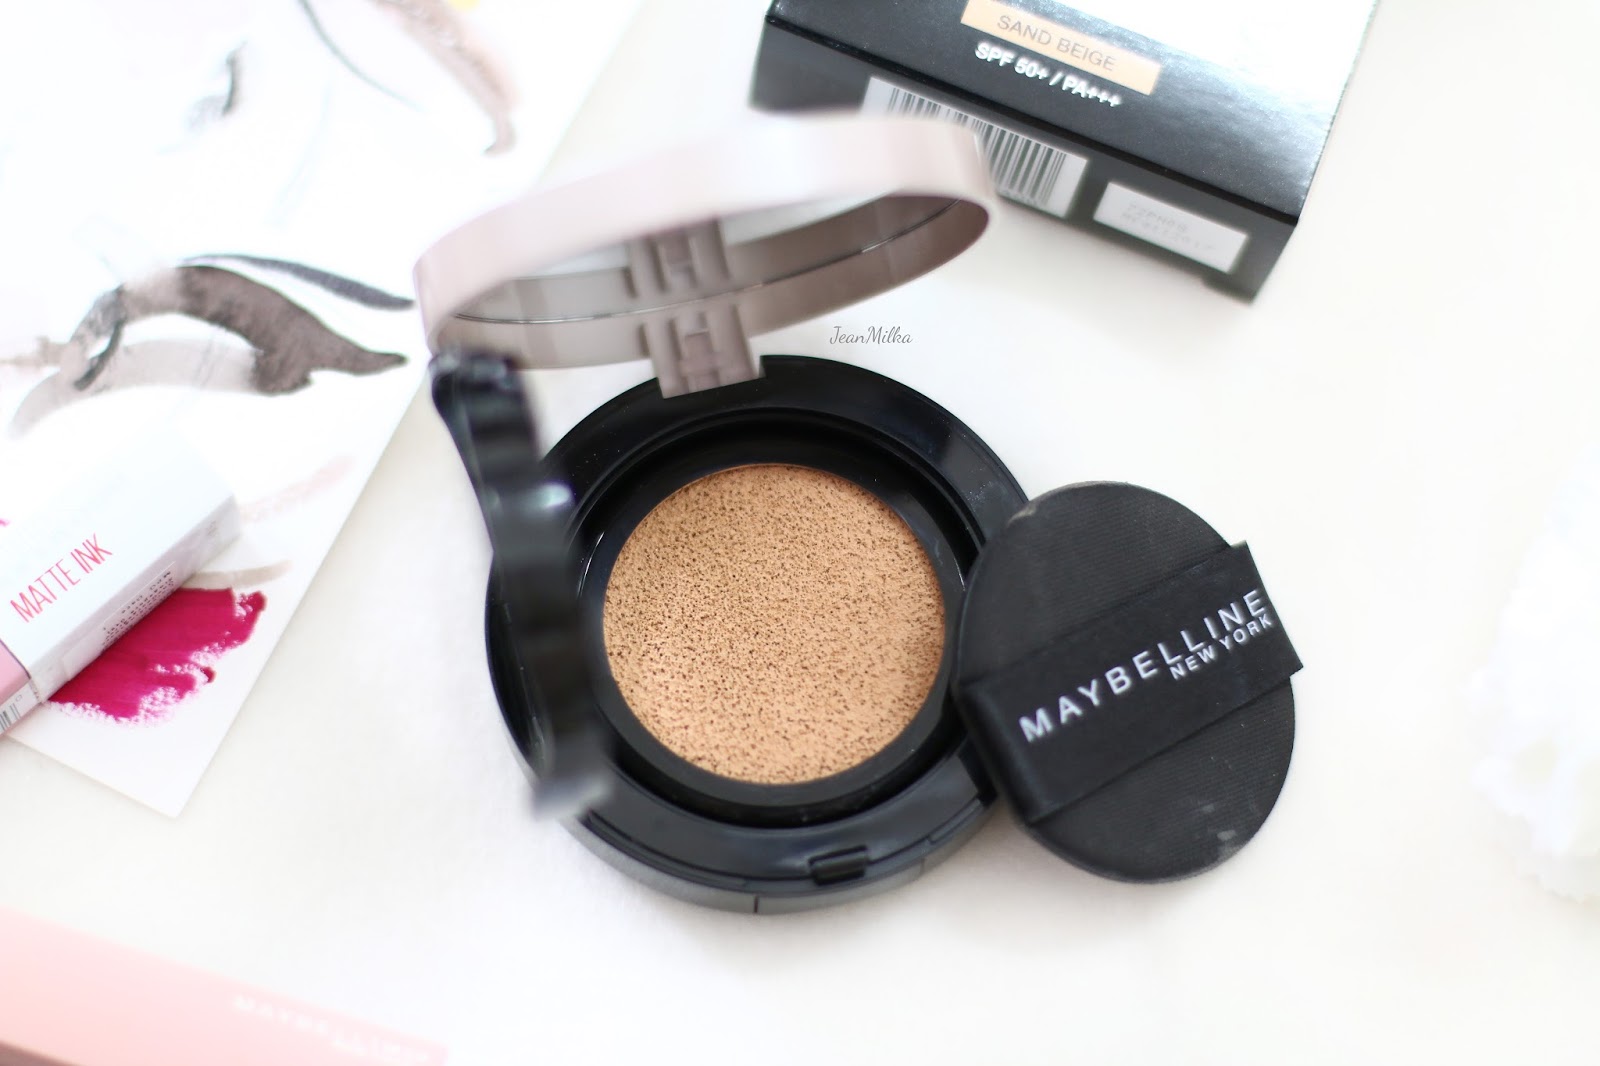 maybelline, maybelline super cushion, maybelline ultra cover cushion, maybelline indonesia, cushion, full coverage cushion, review cushion, makeup, drugstore makeup, maybelline cushion